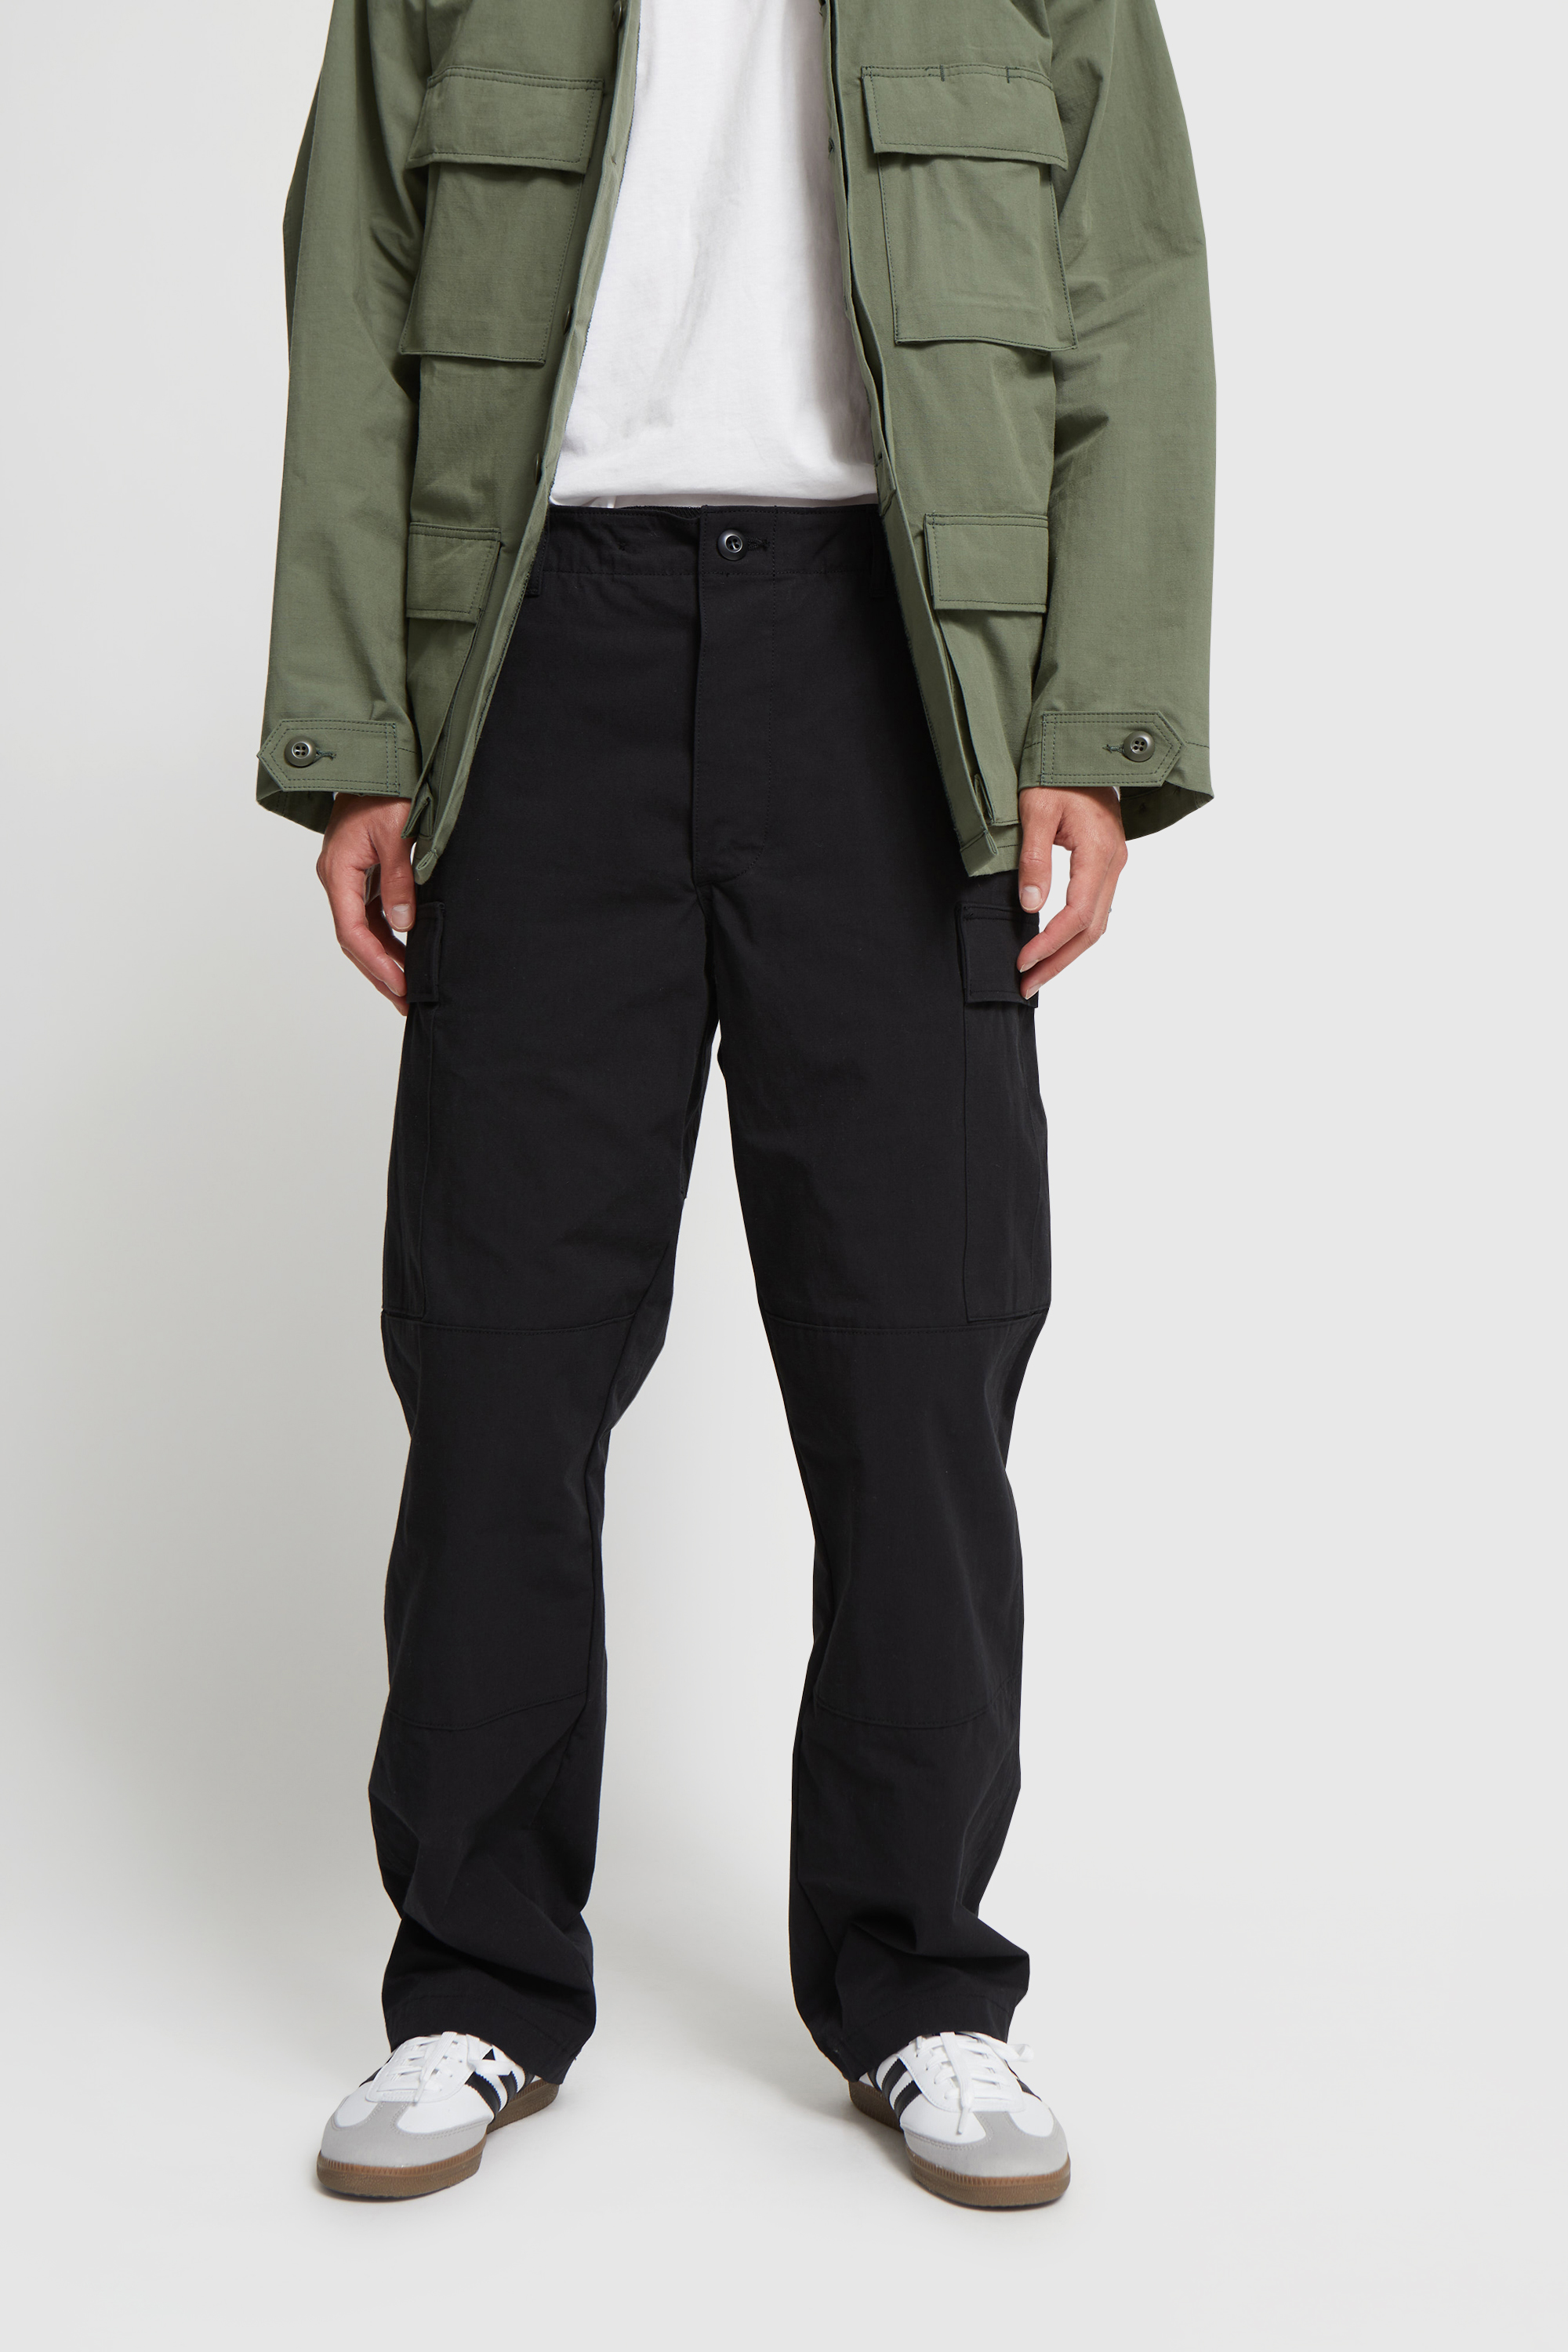 WTAPS WMILL-Trousers 01 / NYCO. Black | WoodWood.com